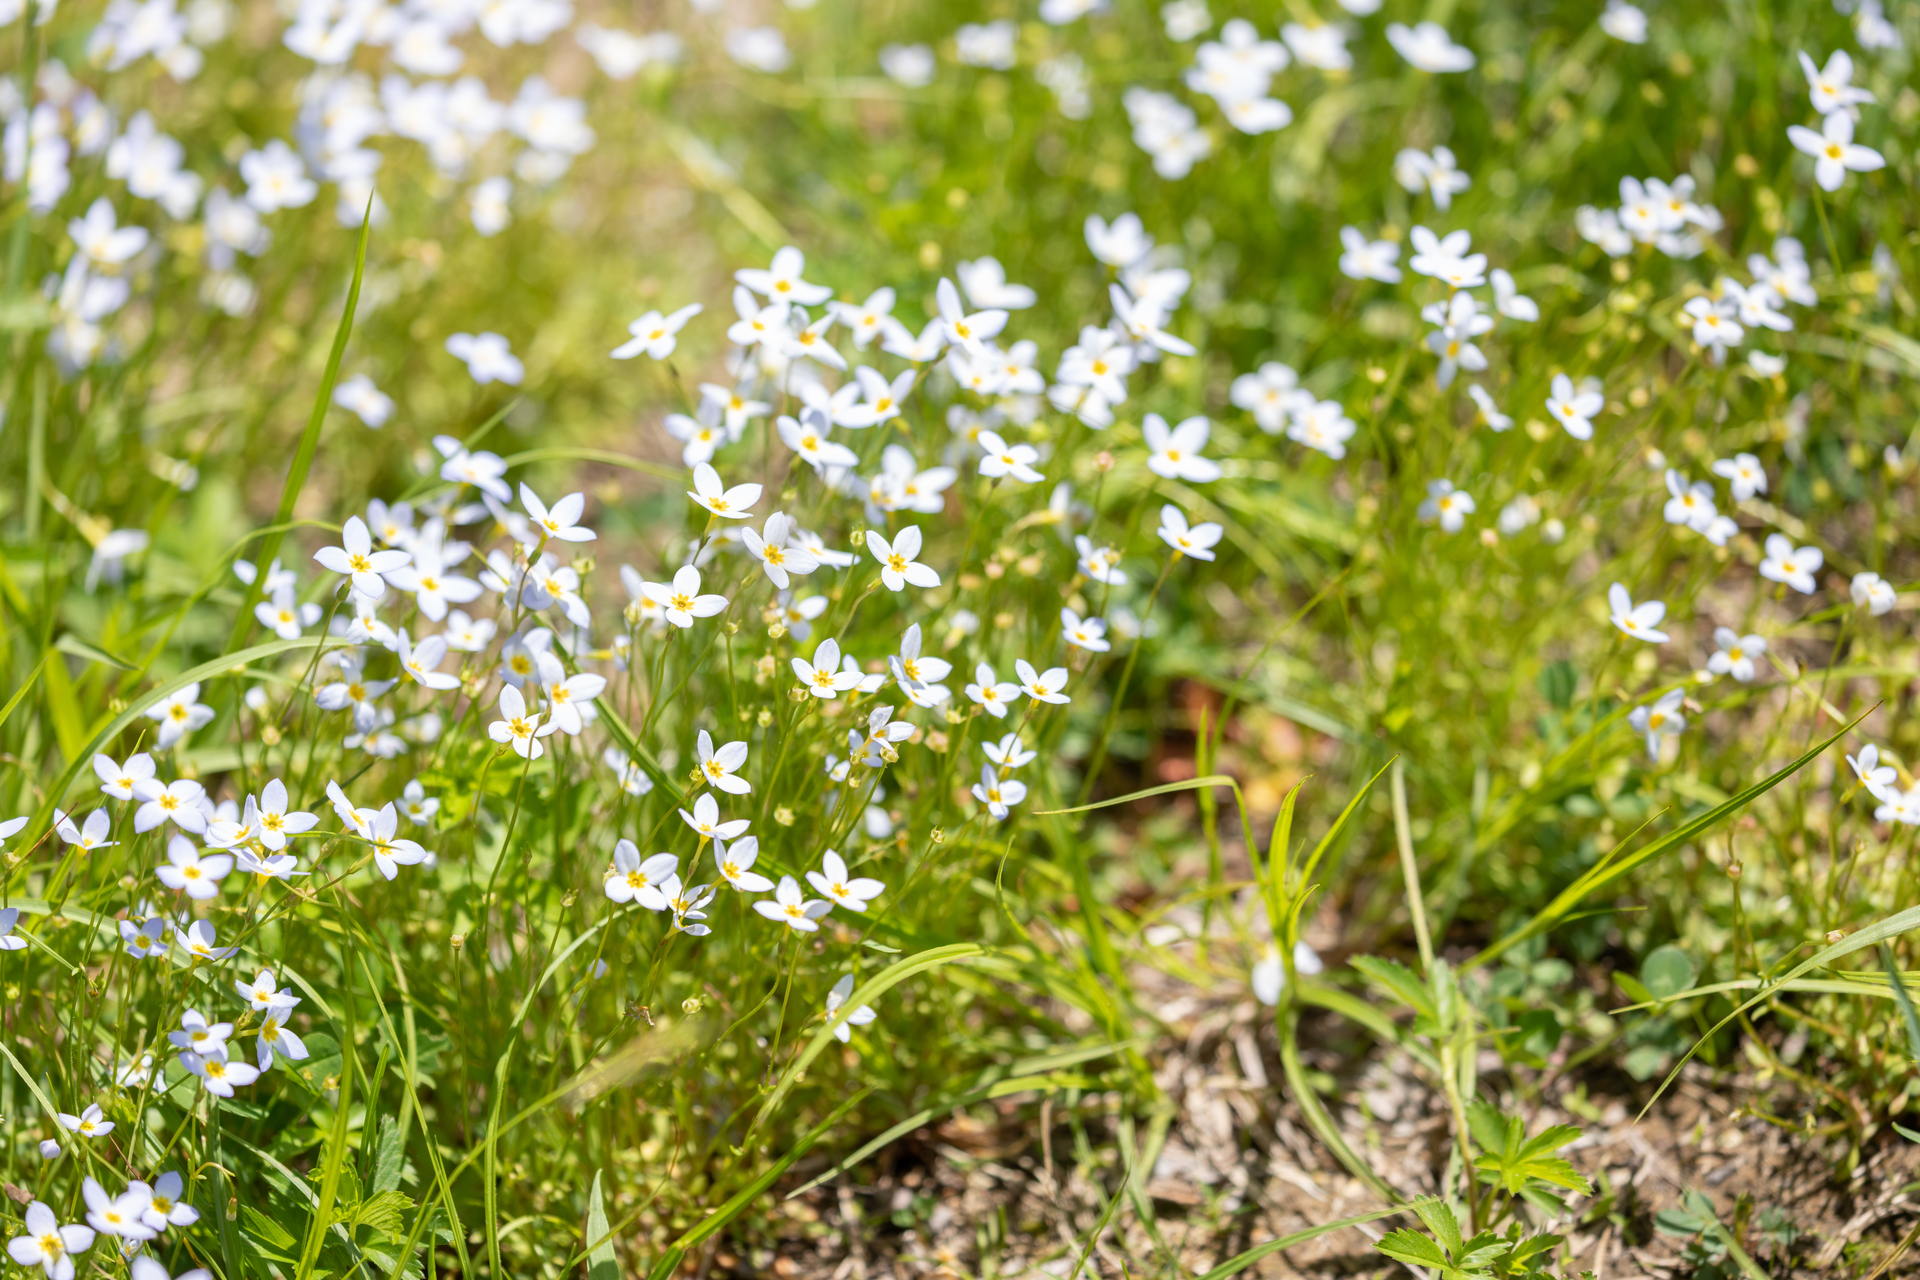 A patch of small, white flowers in the grass.